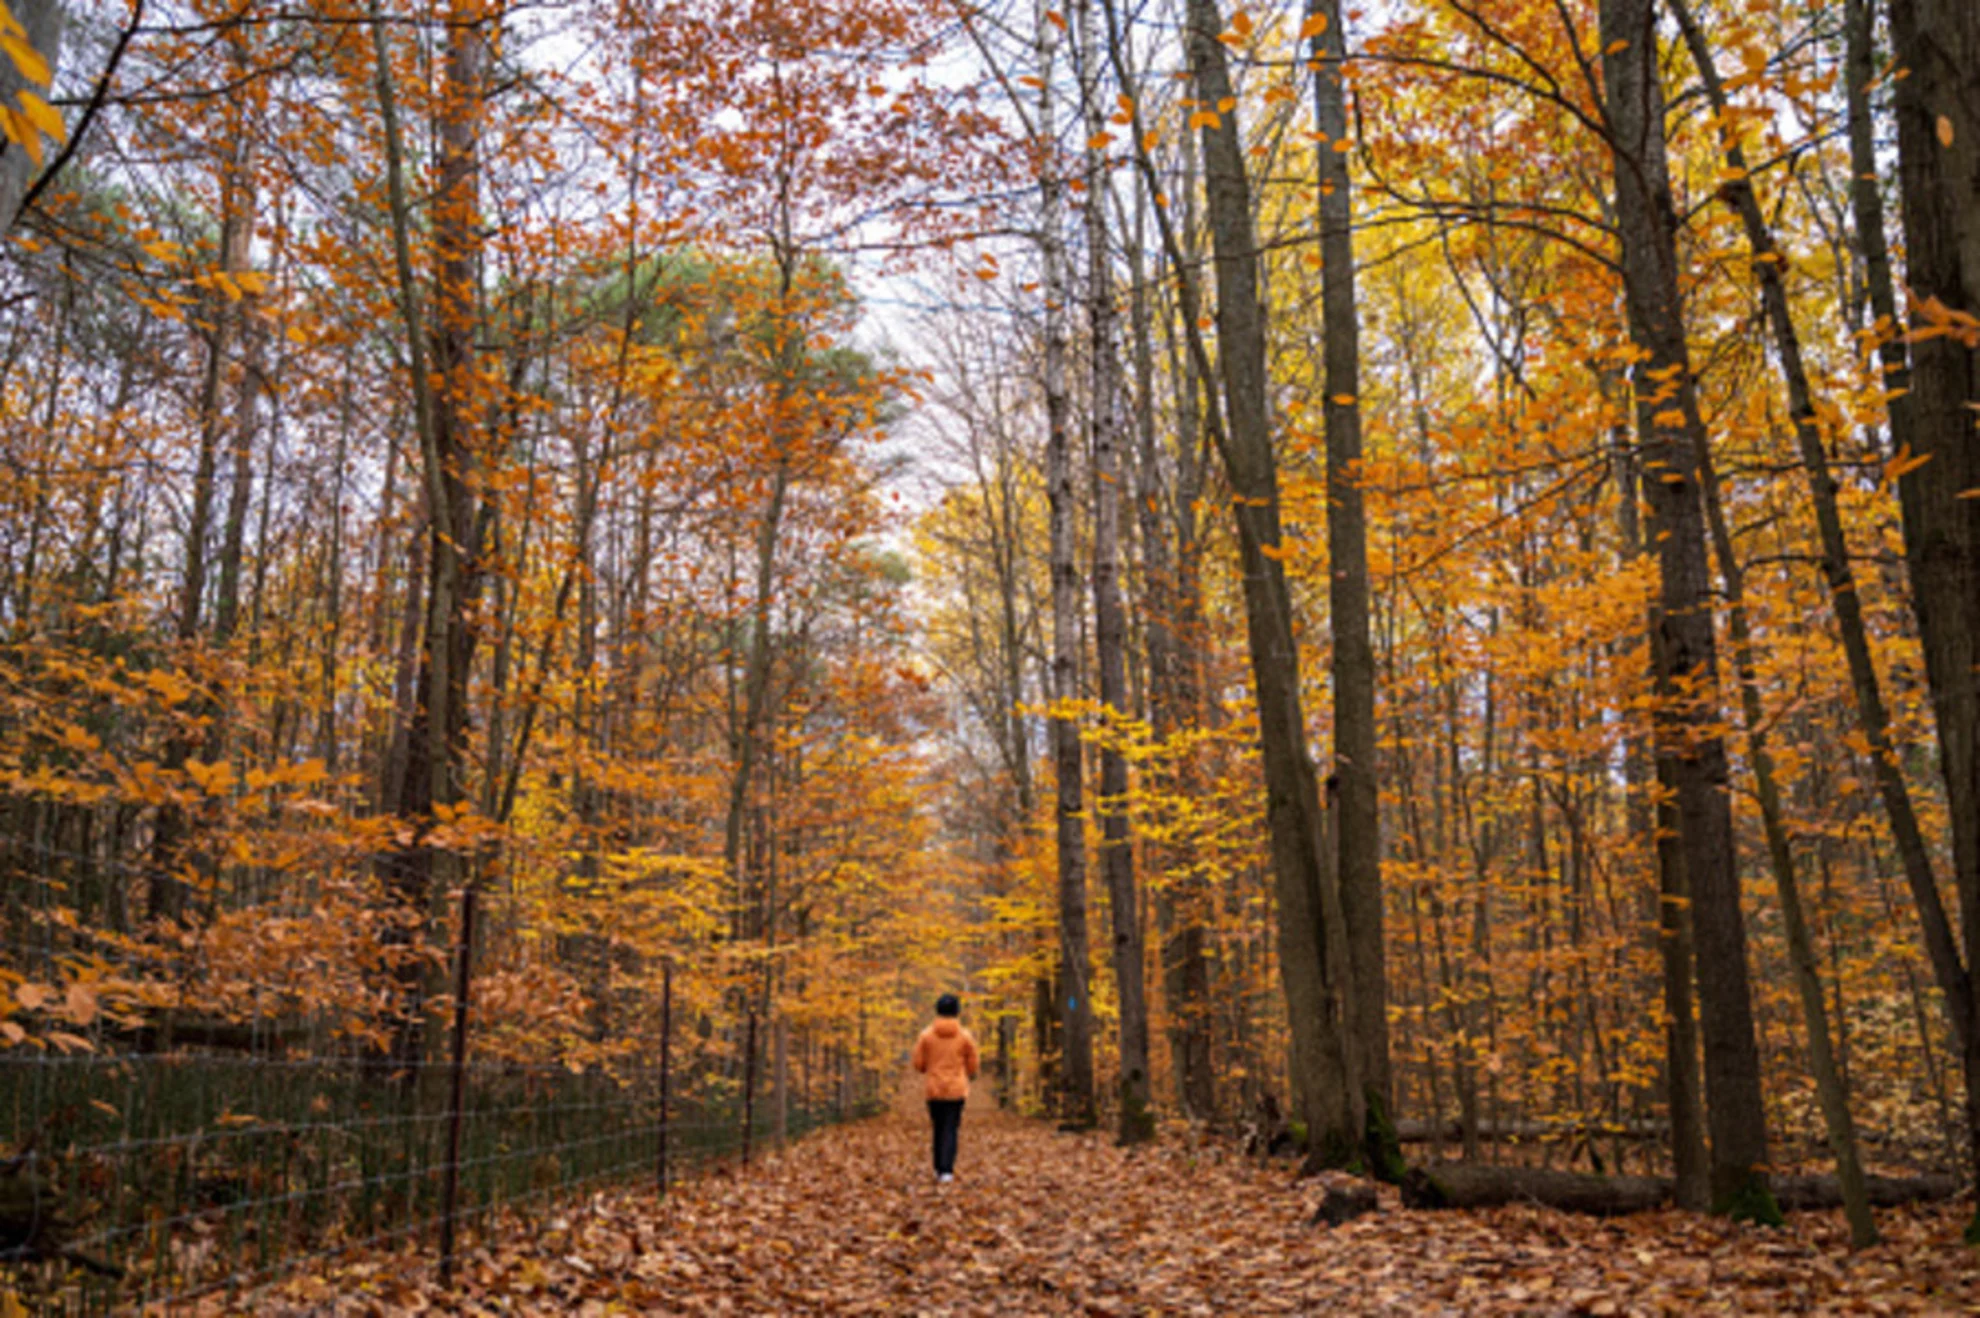 Getty Images. Credit: redtea Creative #: 1330762475. Fall. Autumn leaves. Hiking. Hike. Forest. Link: https://www.gettyimages.ca/detail/photo/hiking-in-autumn-forest-royalty-free-image/1330762475?adppopup=true